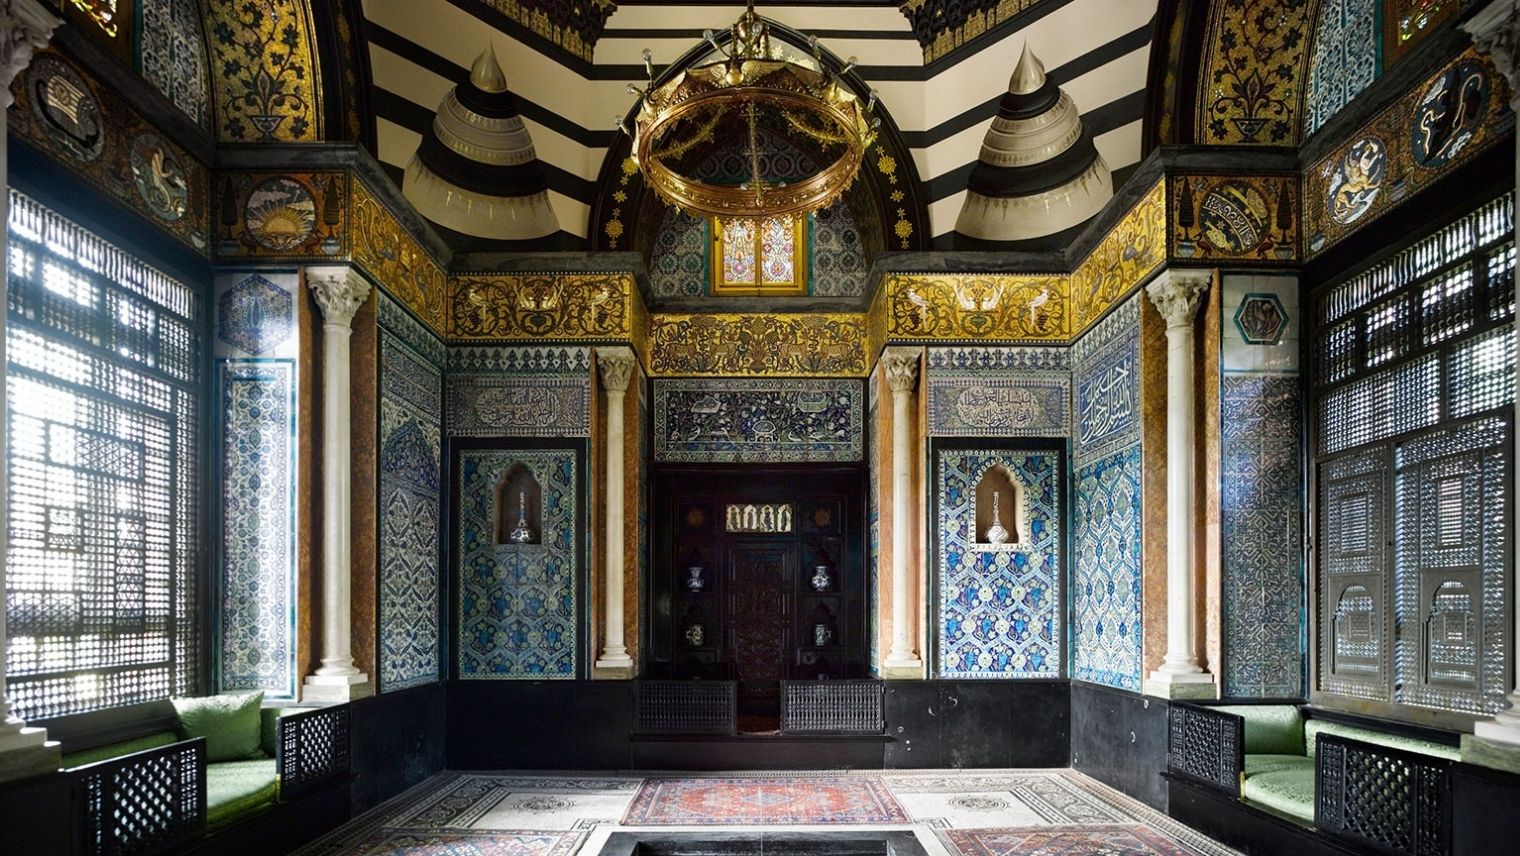 Interior of the Arab Hall at Leighton House